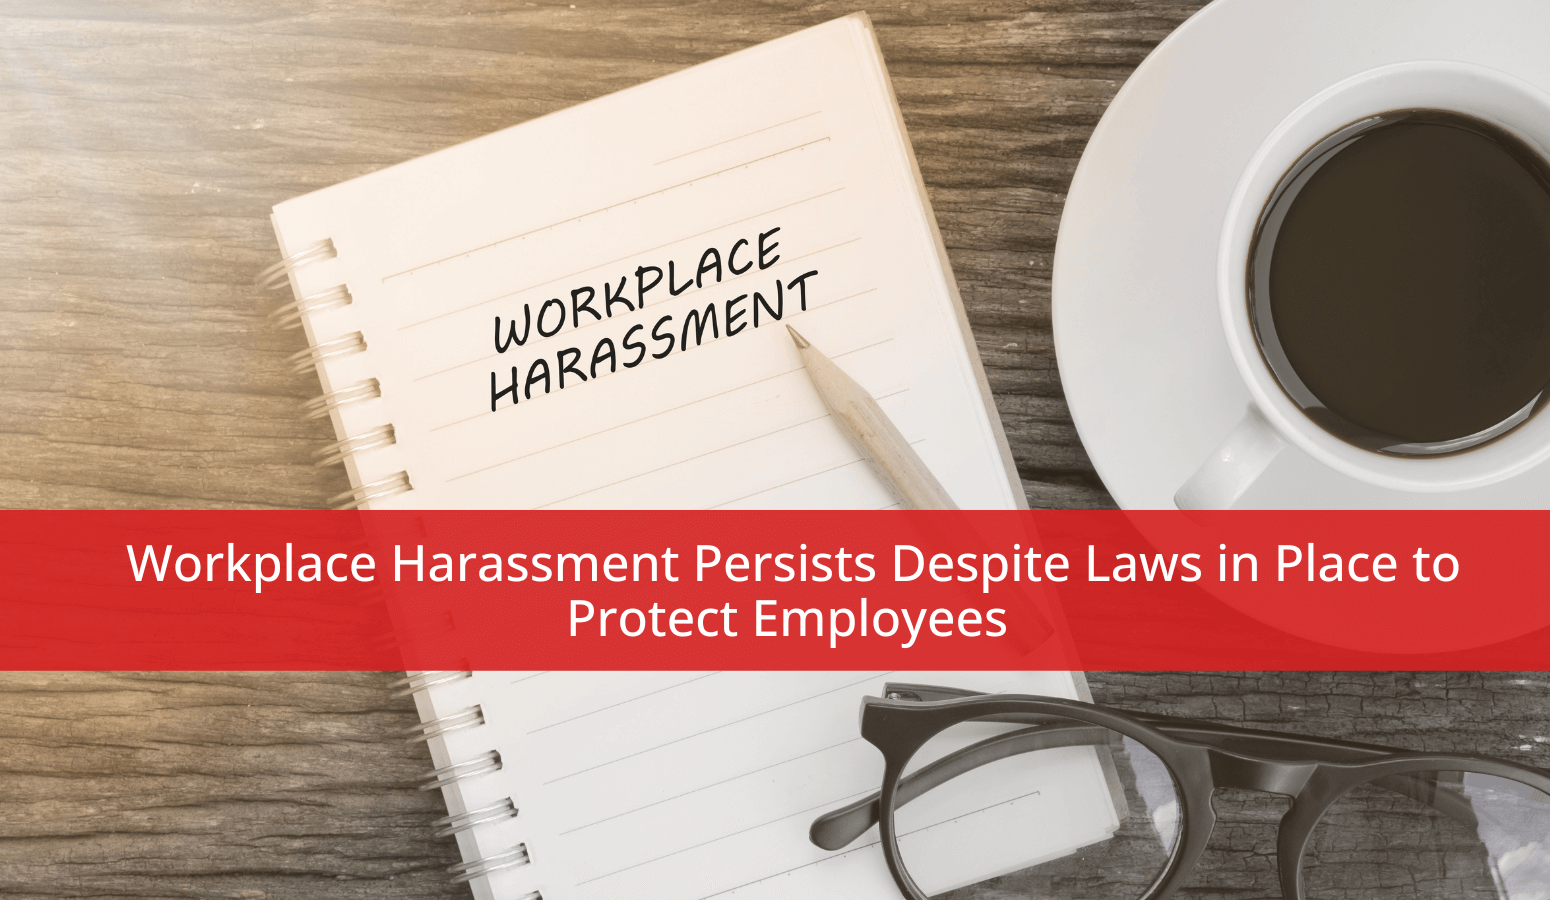 Featured image for “Workplace Harassment Persists Despite Laws in Place to Protect Employees”